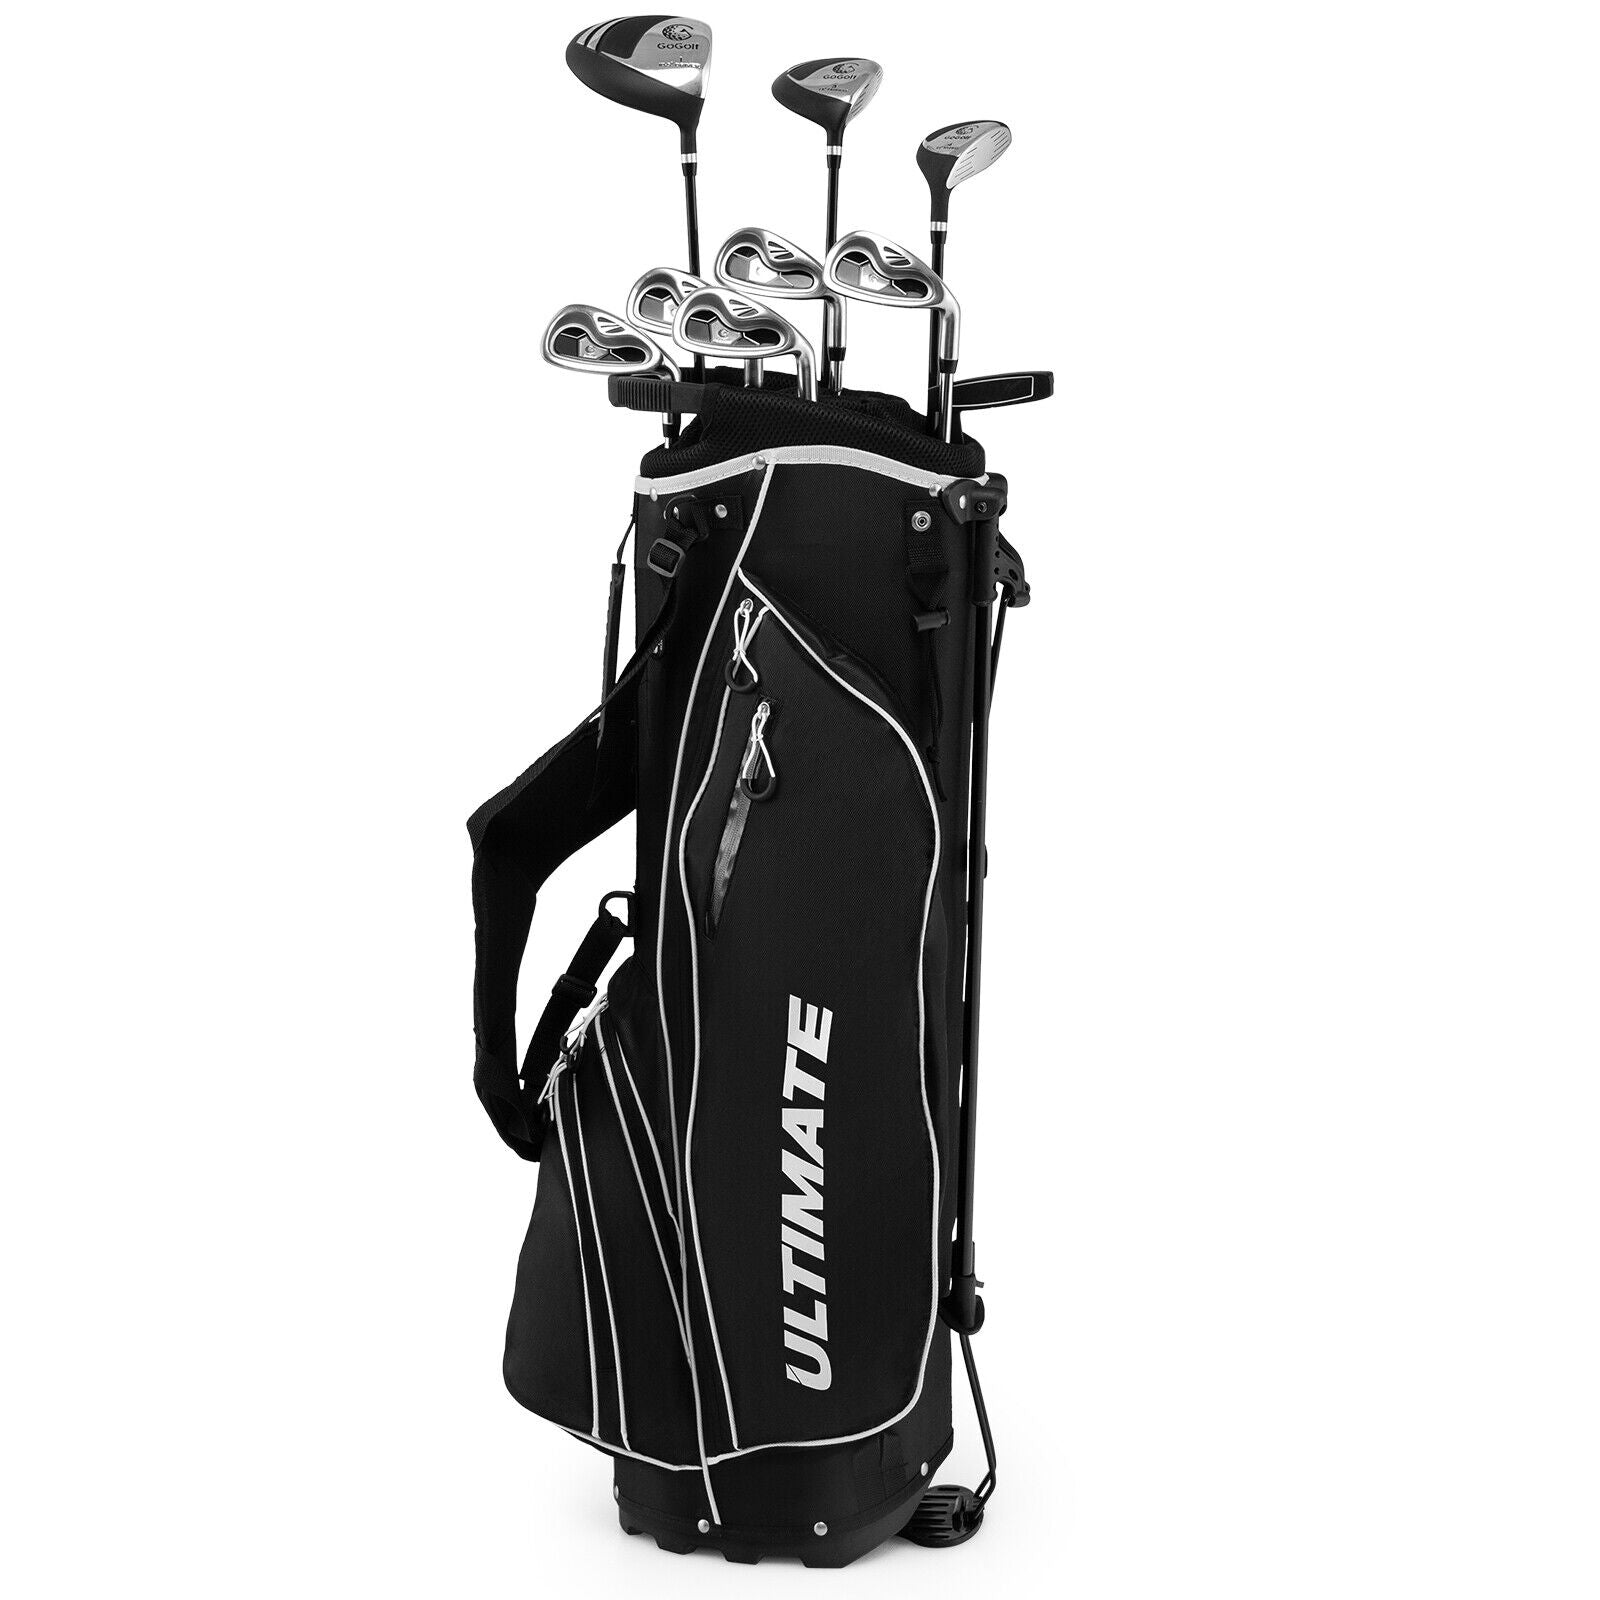 Men’s Profile Complete Golf Club Package Set Includes 10 Pieces - Gallery Canada